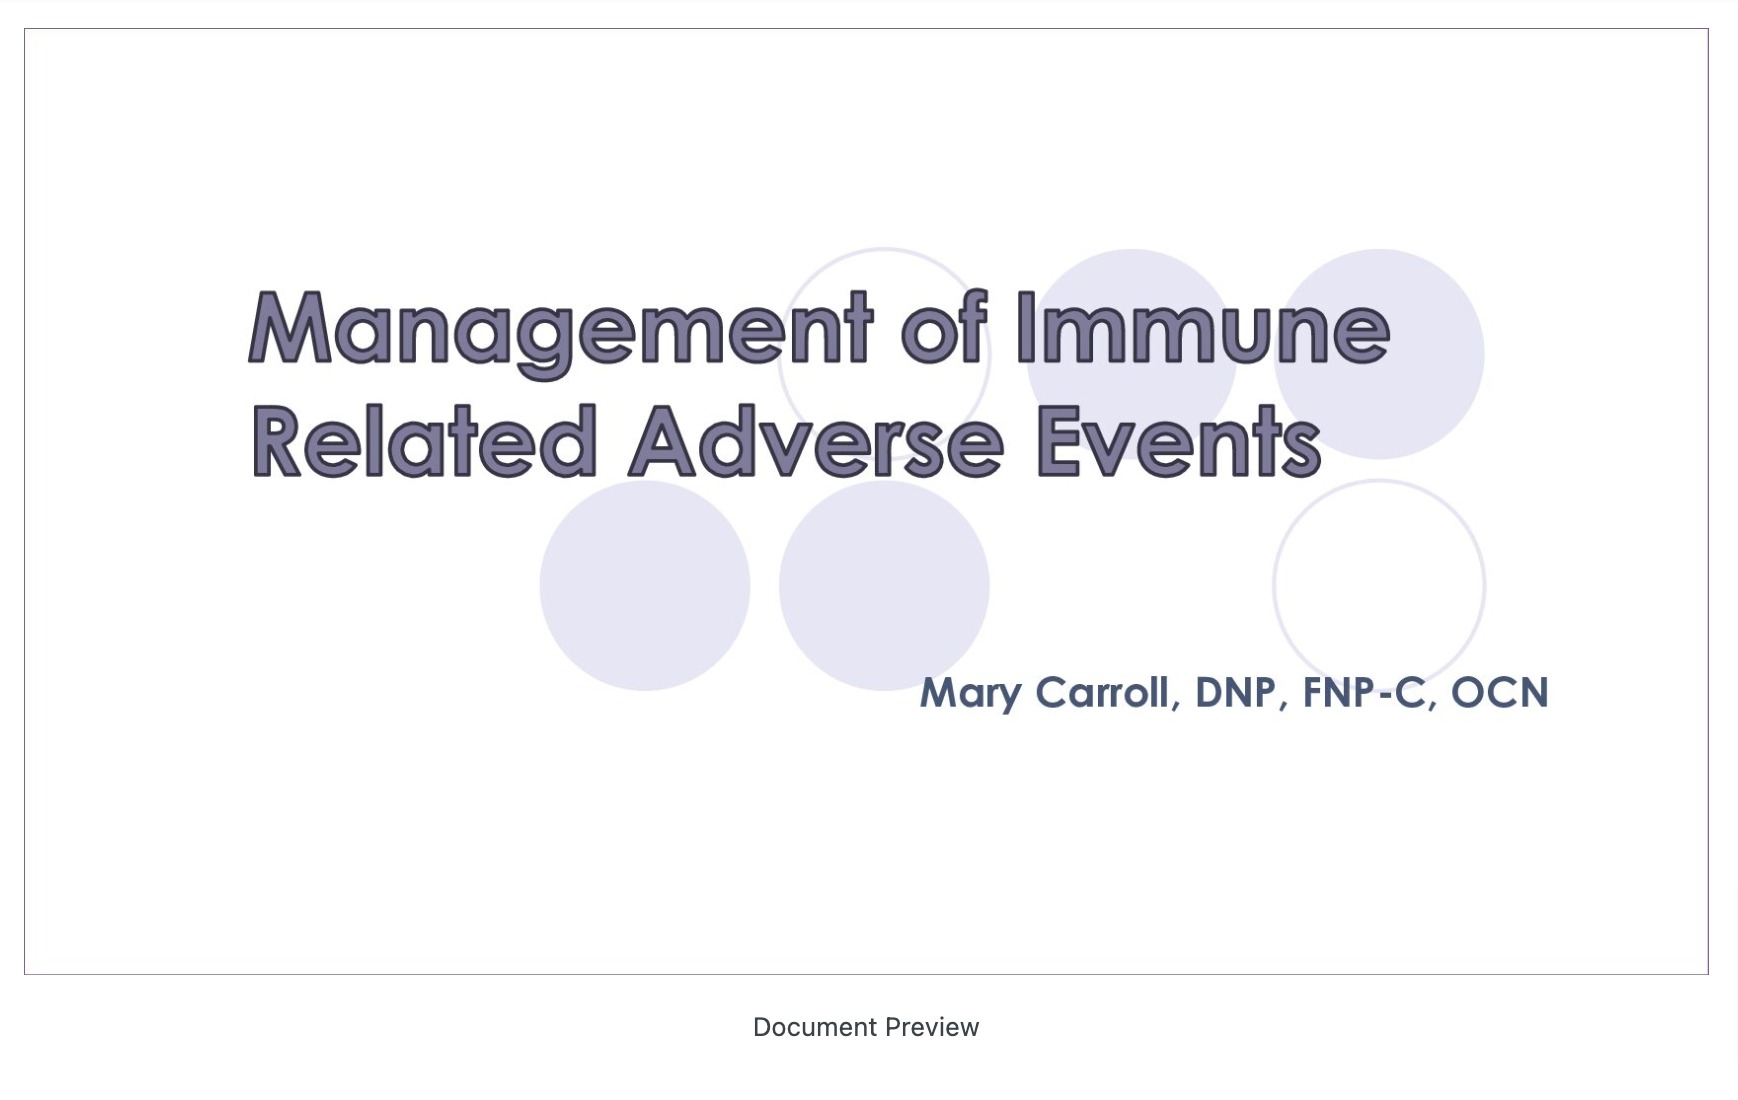 Management of Immune Related Adverse Events